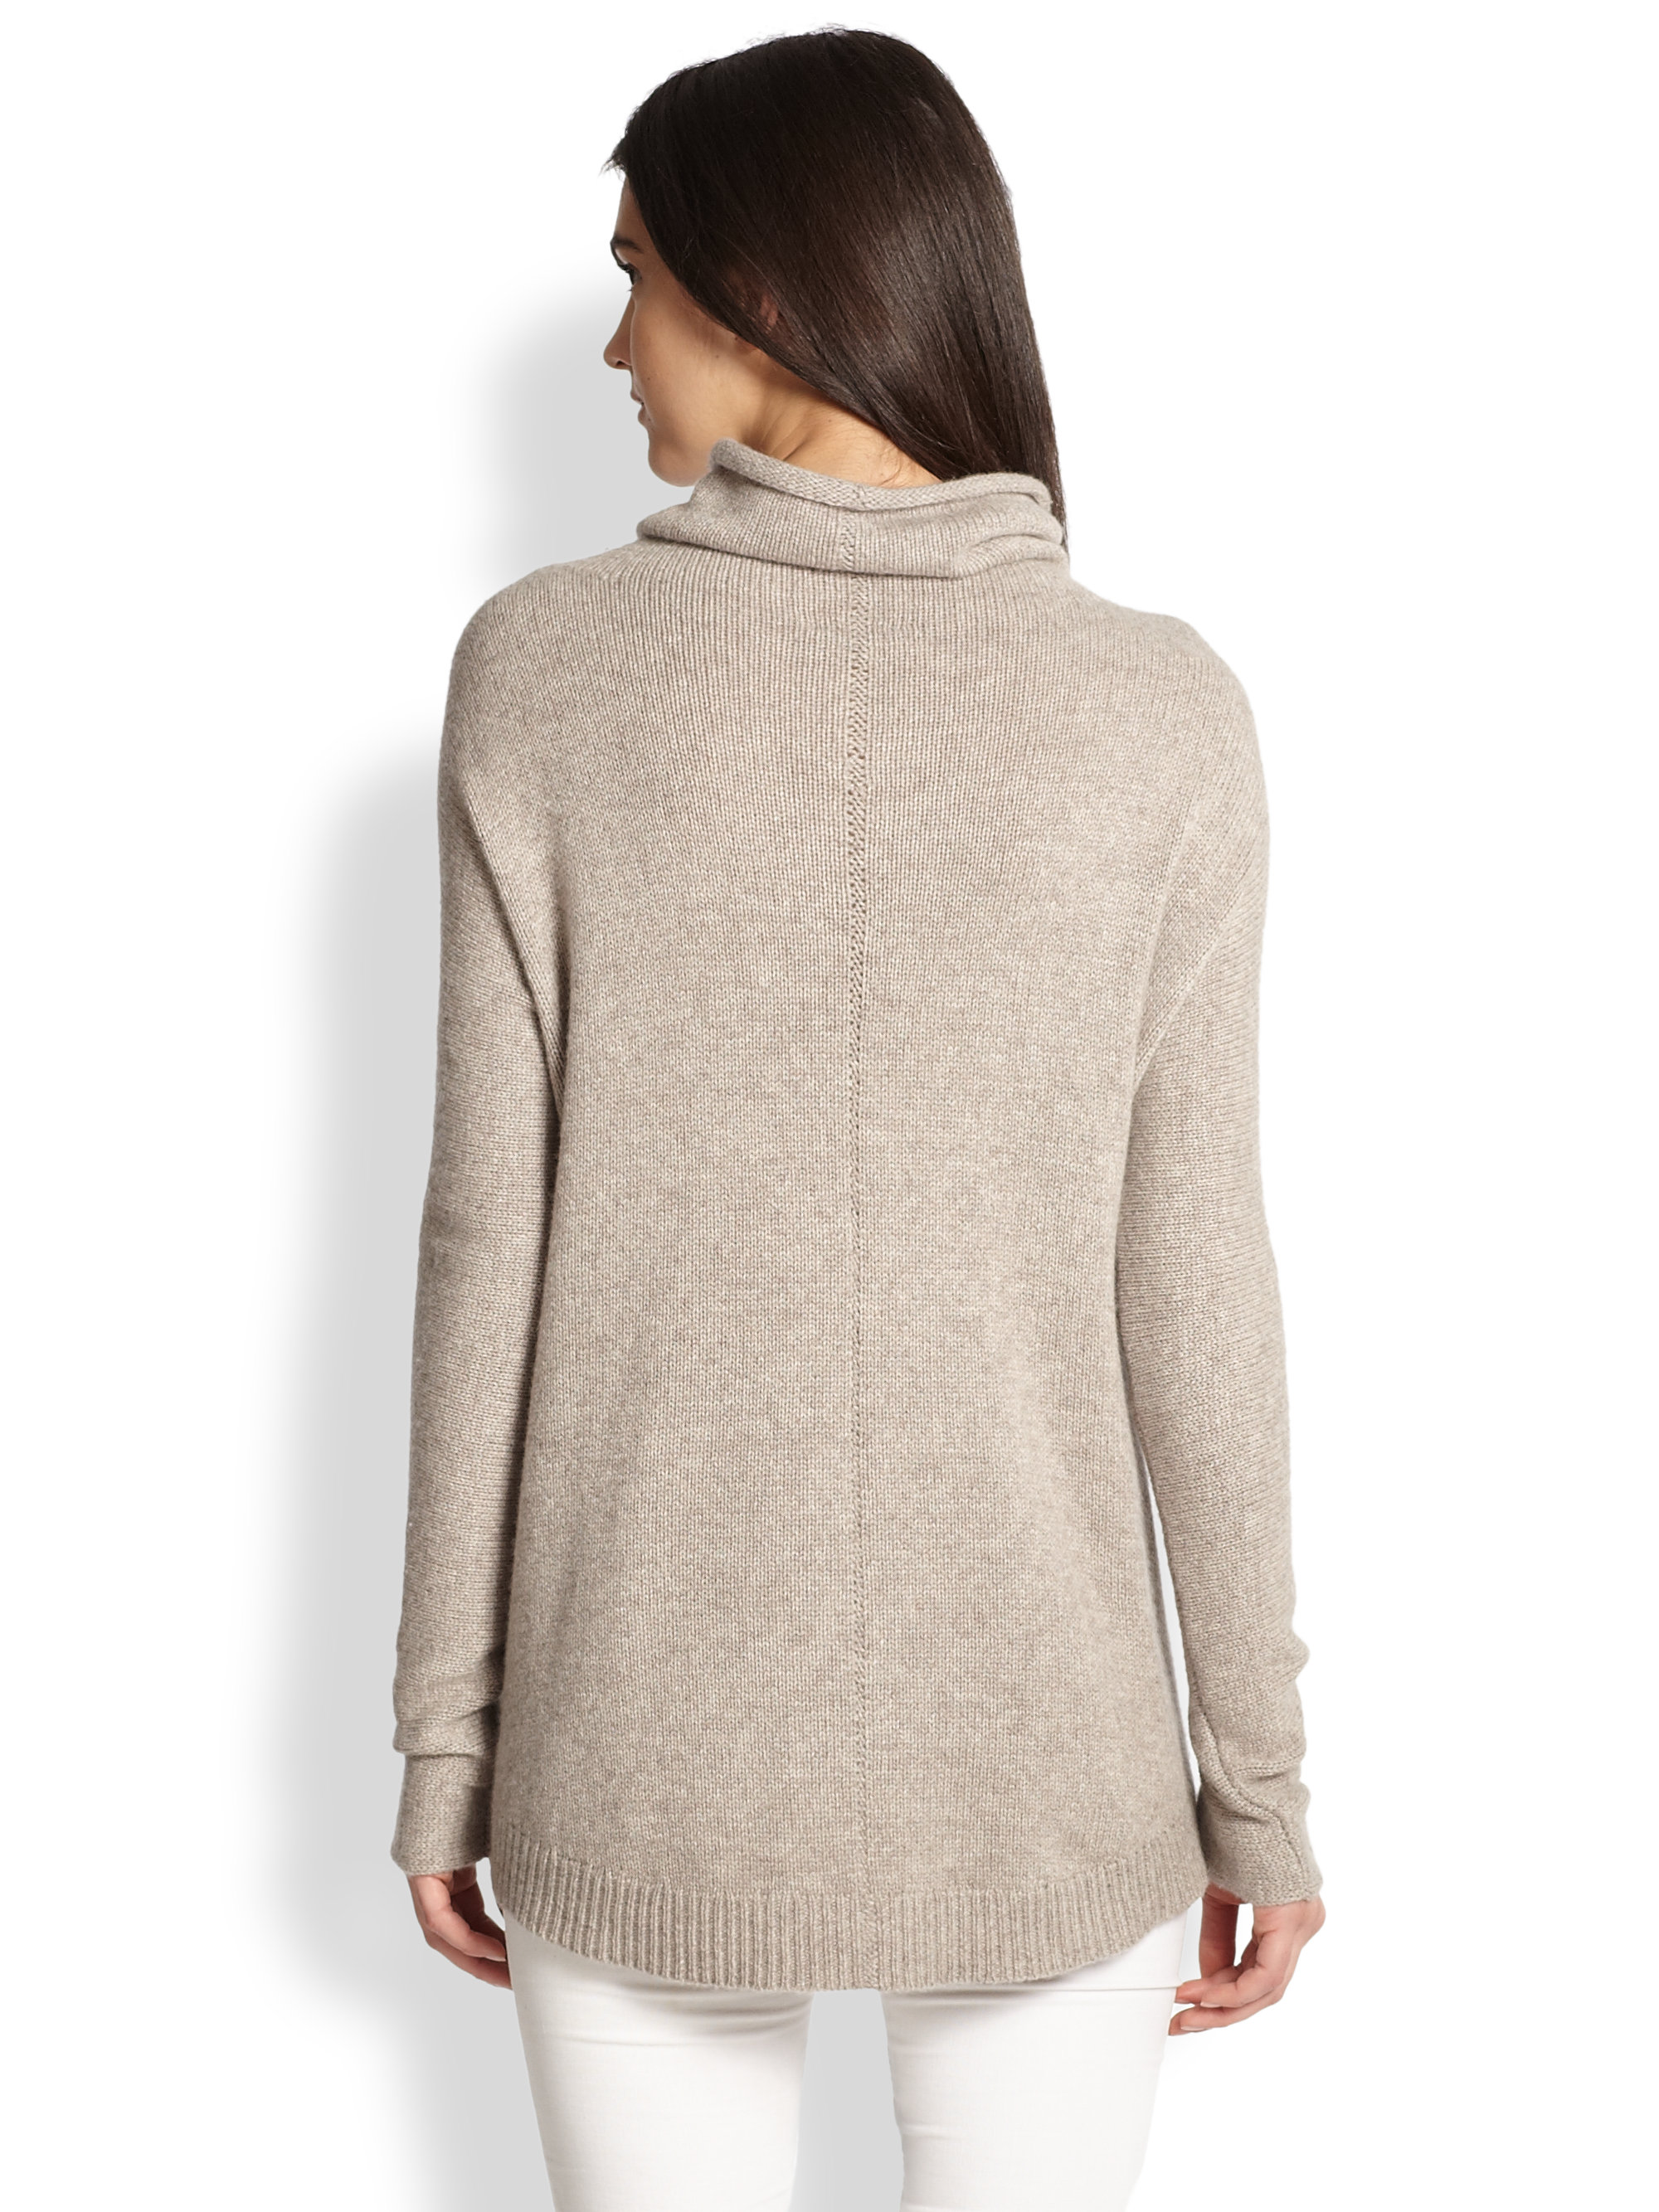 Theory Norman B Cashmere Draped Turtleneck Sweater in Taupe (Gray) - Lyst